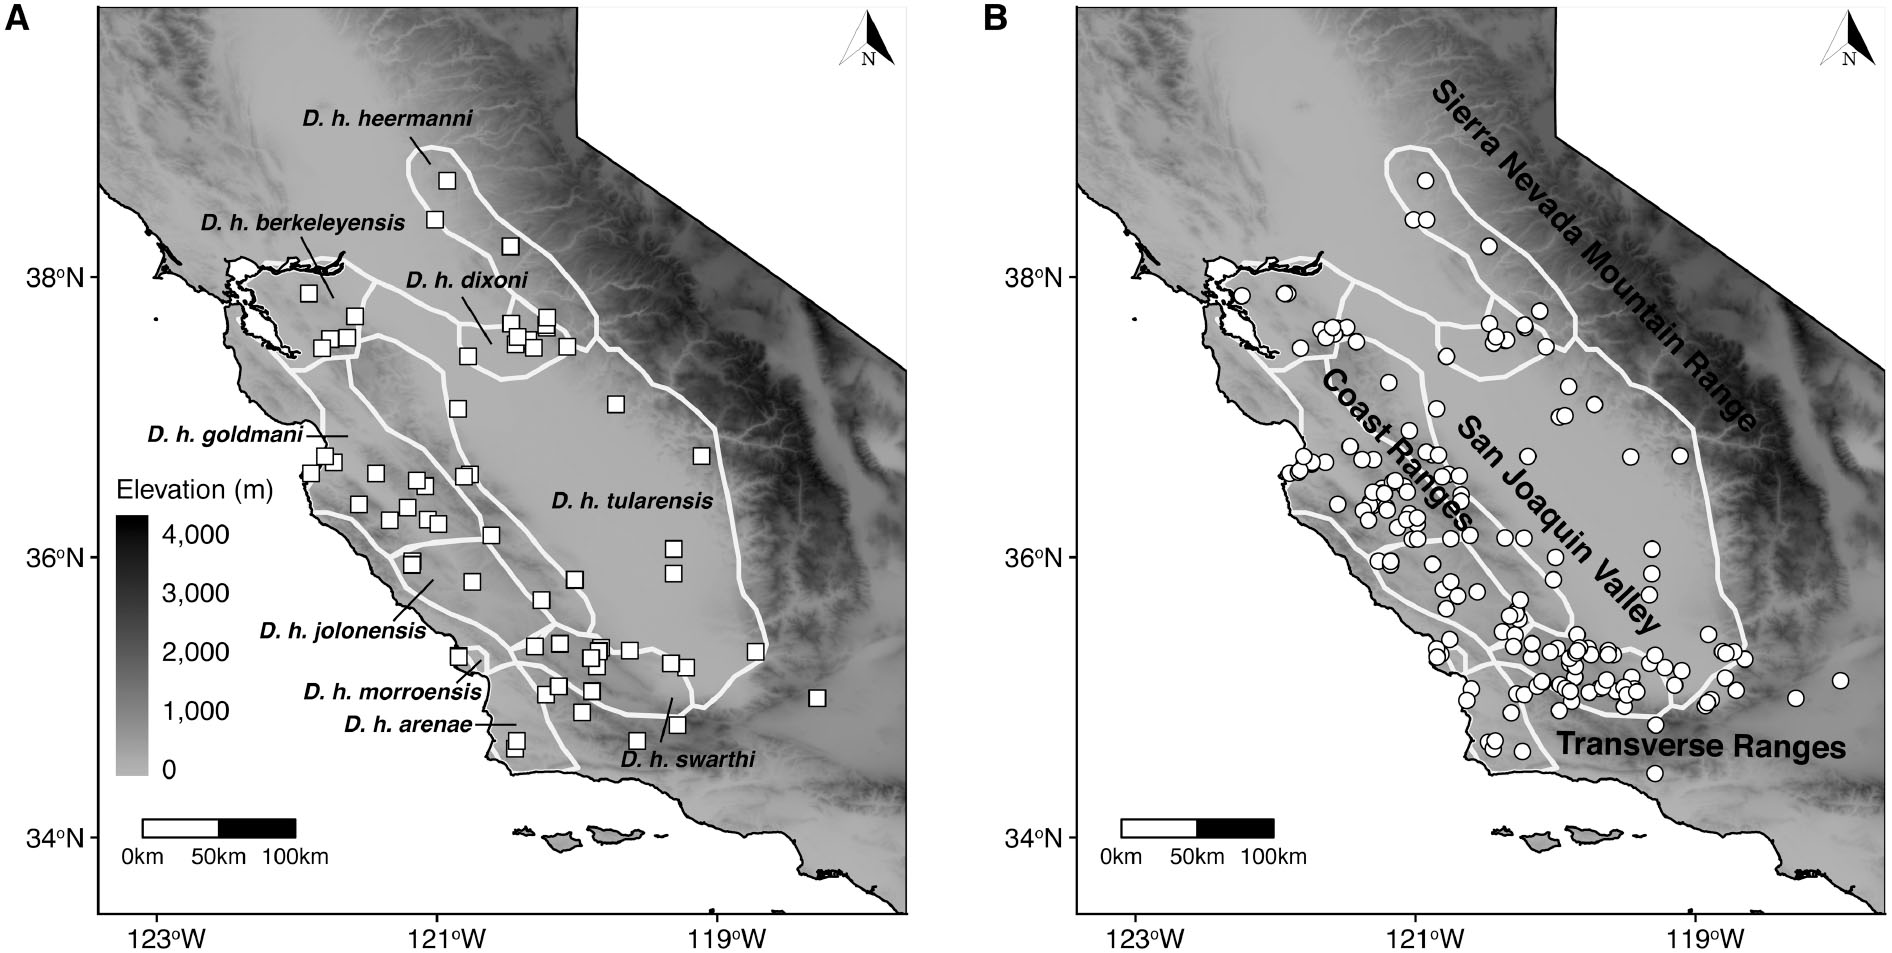 impressionisme hypotese personificering Phylogeographic assessment of the Heermann's kangaroo rat (Dipodomys  heermanni)